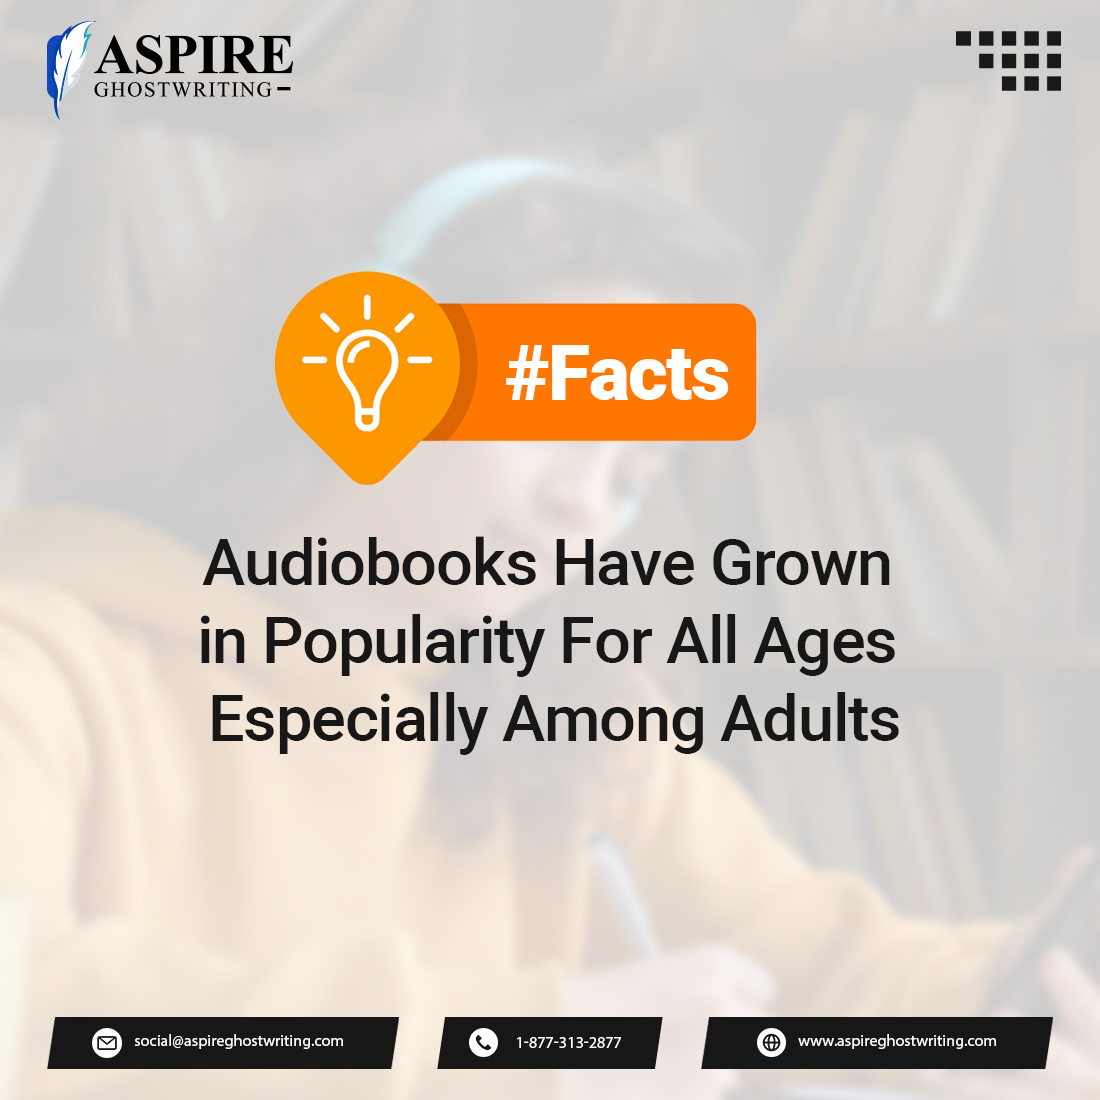 According to research from Brigham Young University, audiobooks are experiencing an upward trend, particularly among adult listeners.

Contact us today and publish your audiobook with us.

#aspireghostwriting #lineediting #writingstyle #bookmarketing #bookpublishing #facts